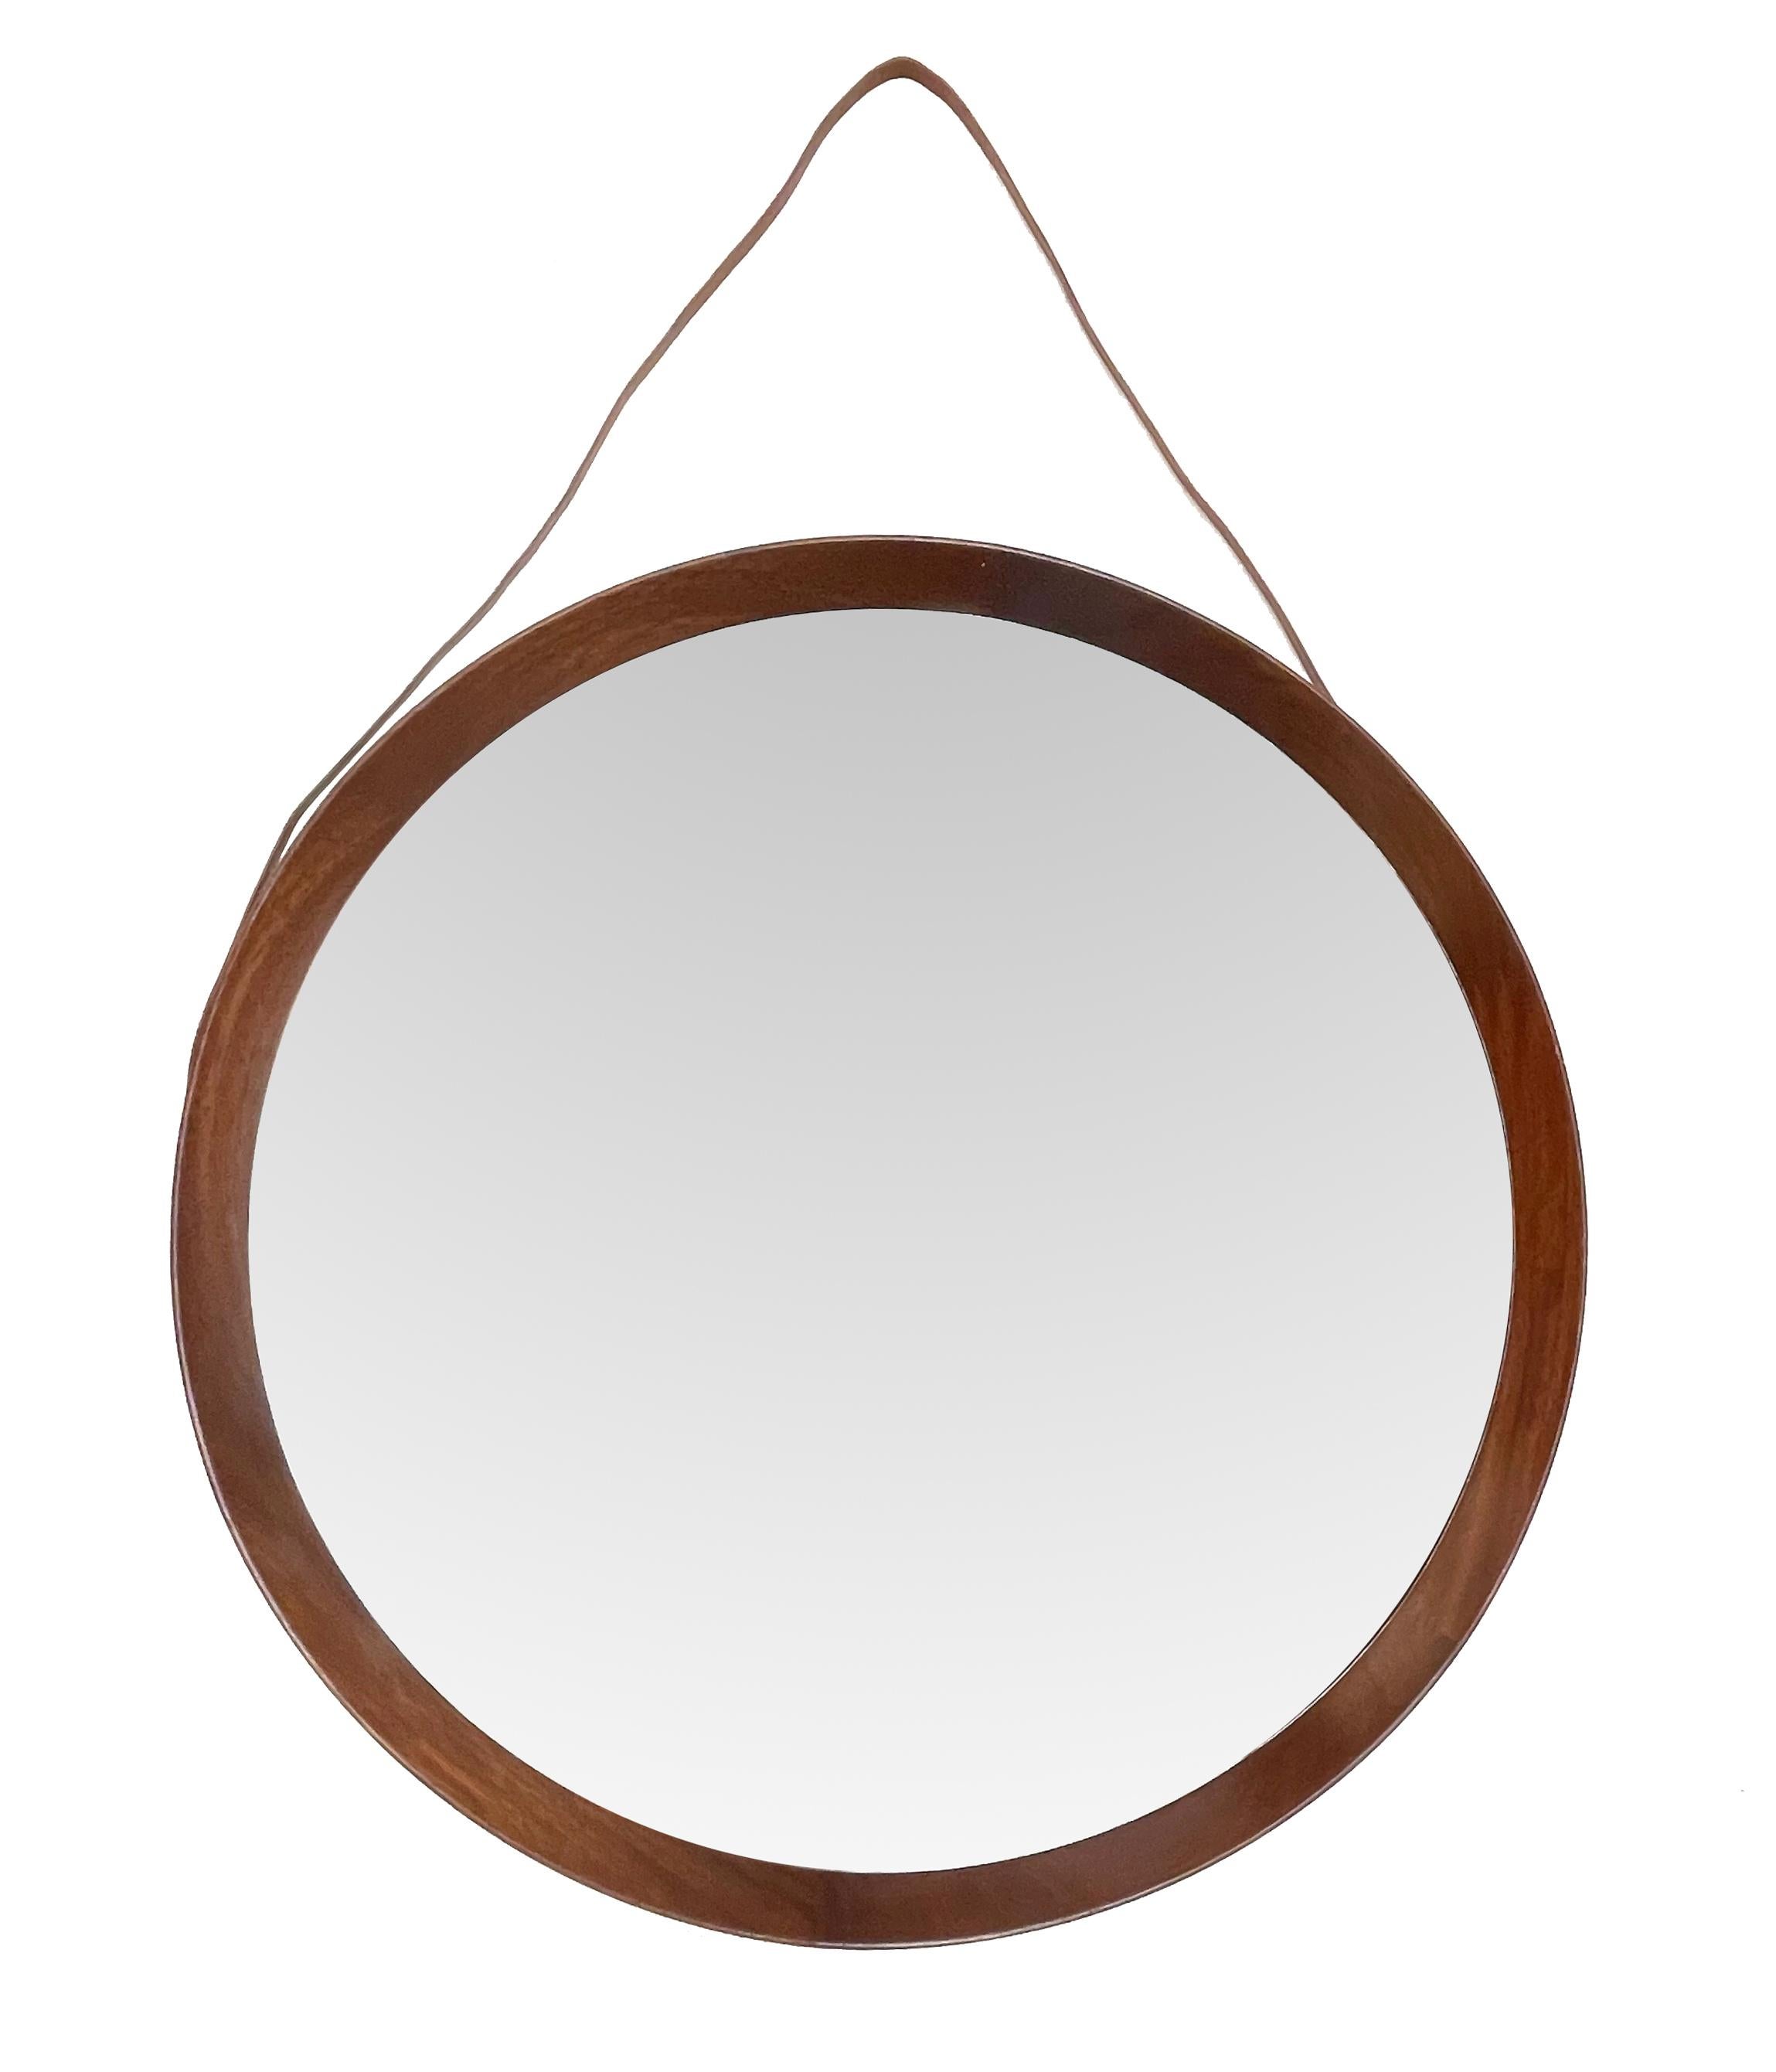 Amazing midcentury in teak with a leather hanging strap wall mirror. This astonishing item was designed by Uno & Östen Kristiansson for a Luxus production during the 1960s. 

The frame circulates the glass and is made out of different pieces of